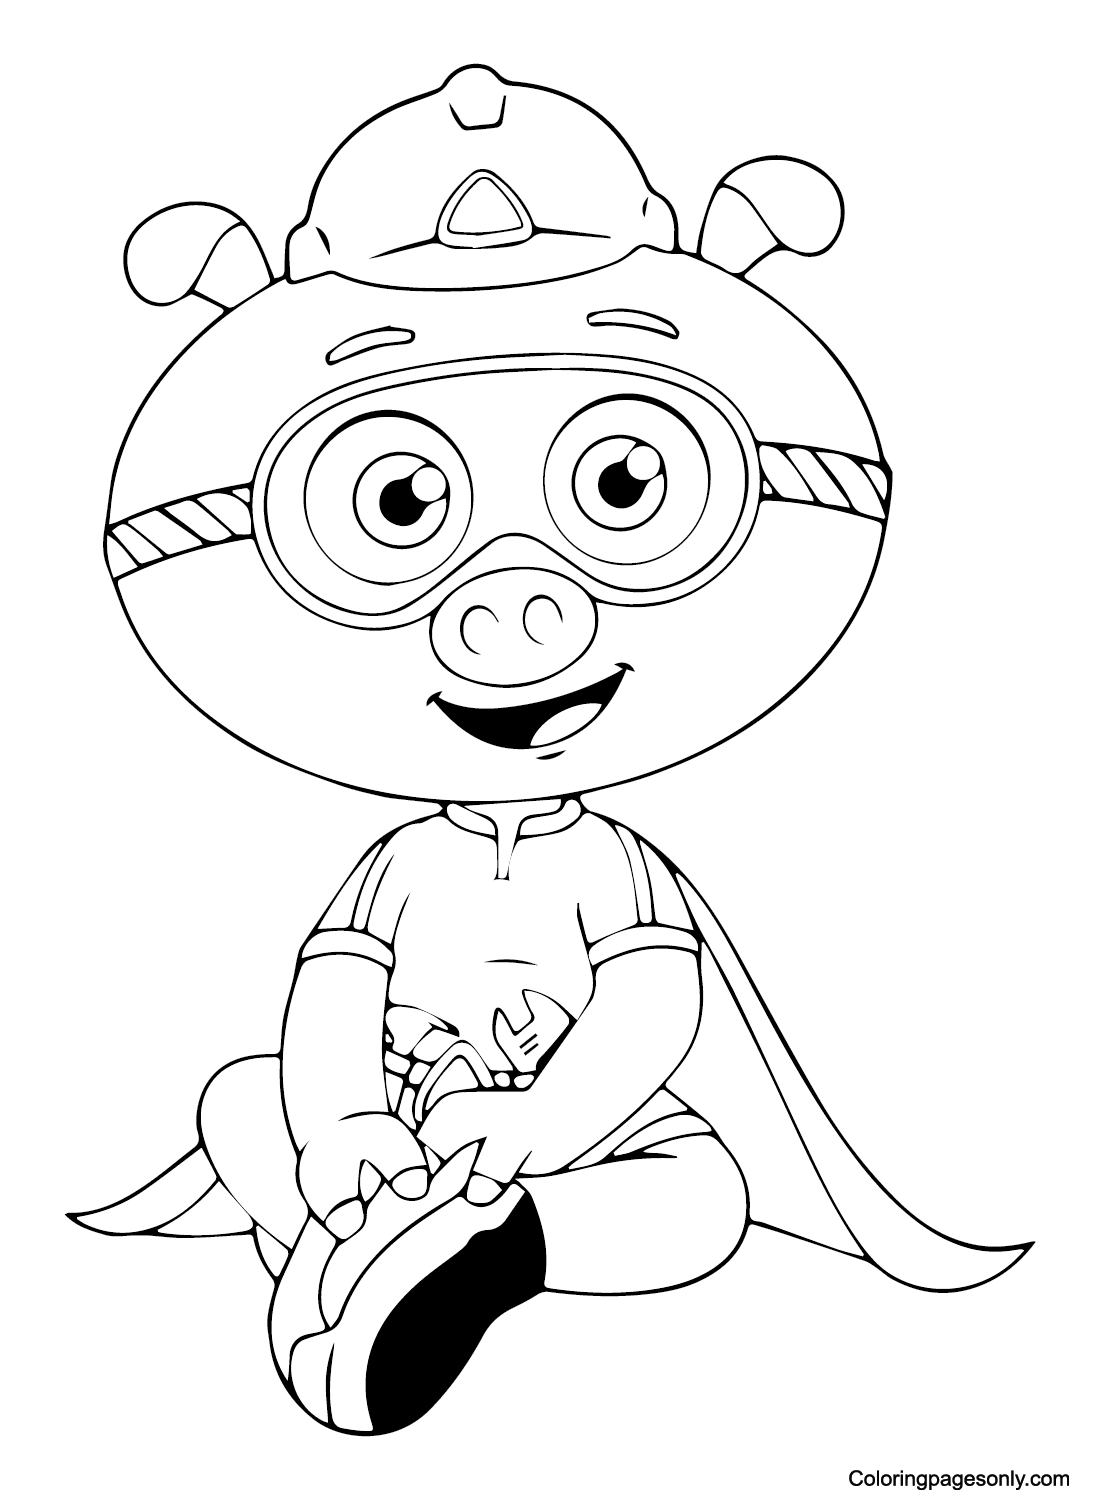 Super Why Alpha Pig Coloring Page